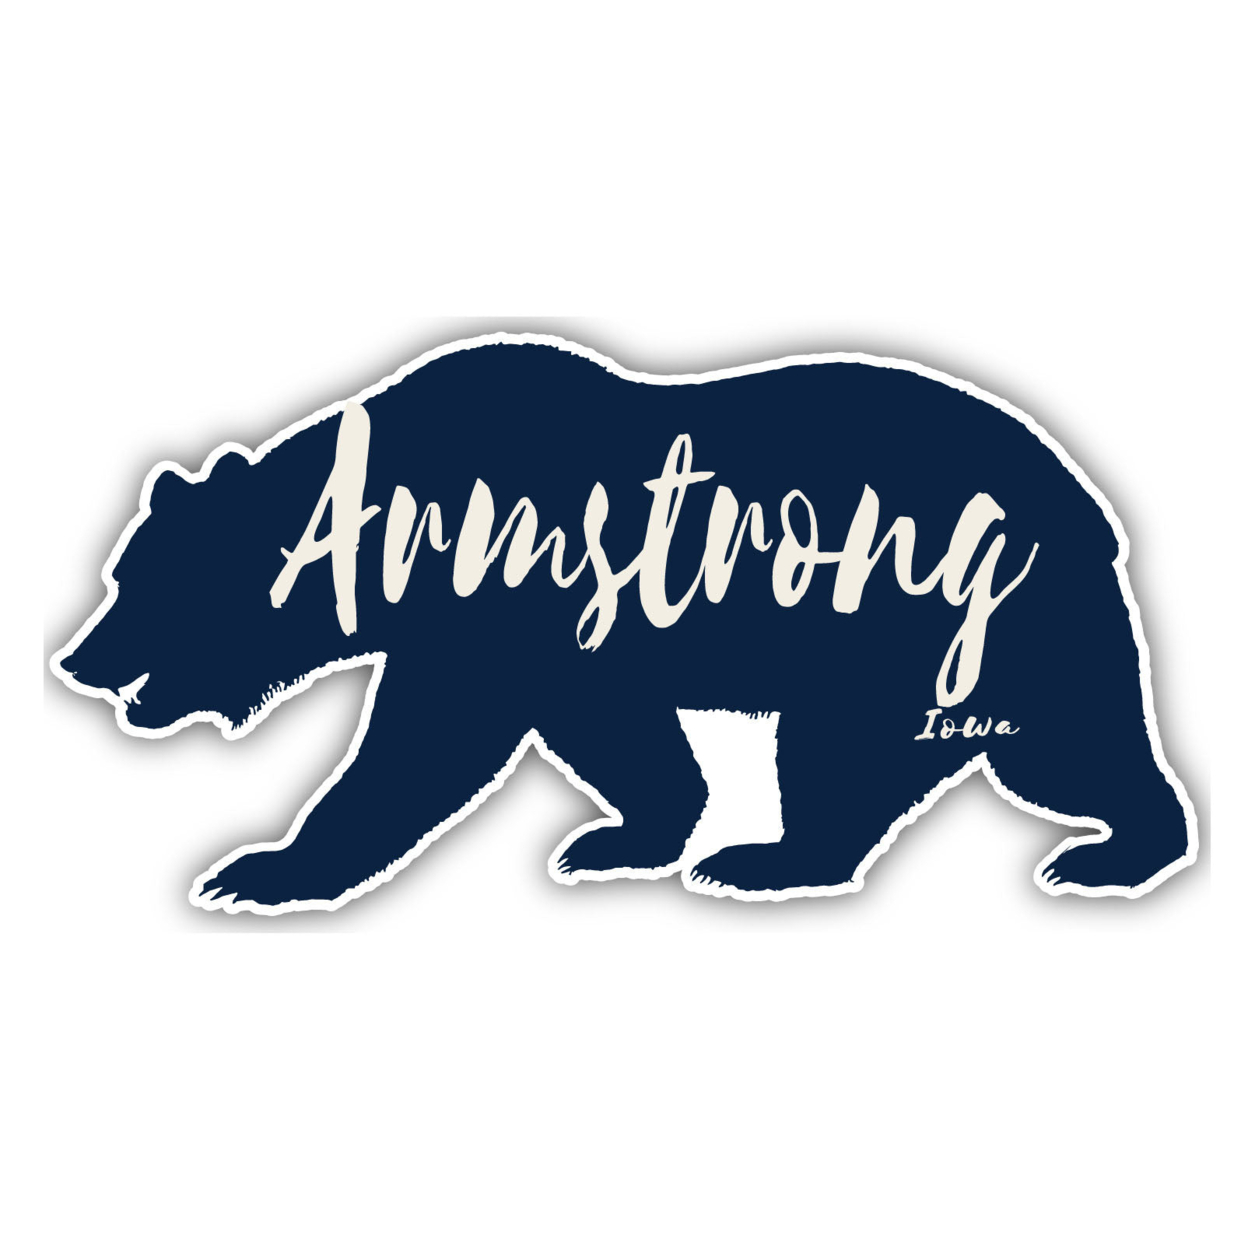 Armstrong Iowa Souvenir Decorative Stickers (Choose Theme And Size) - 4-Pack, 12-Inch, Bear